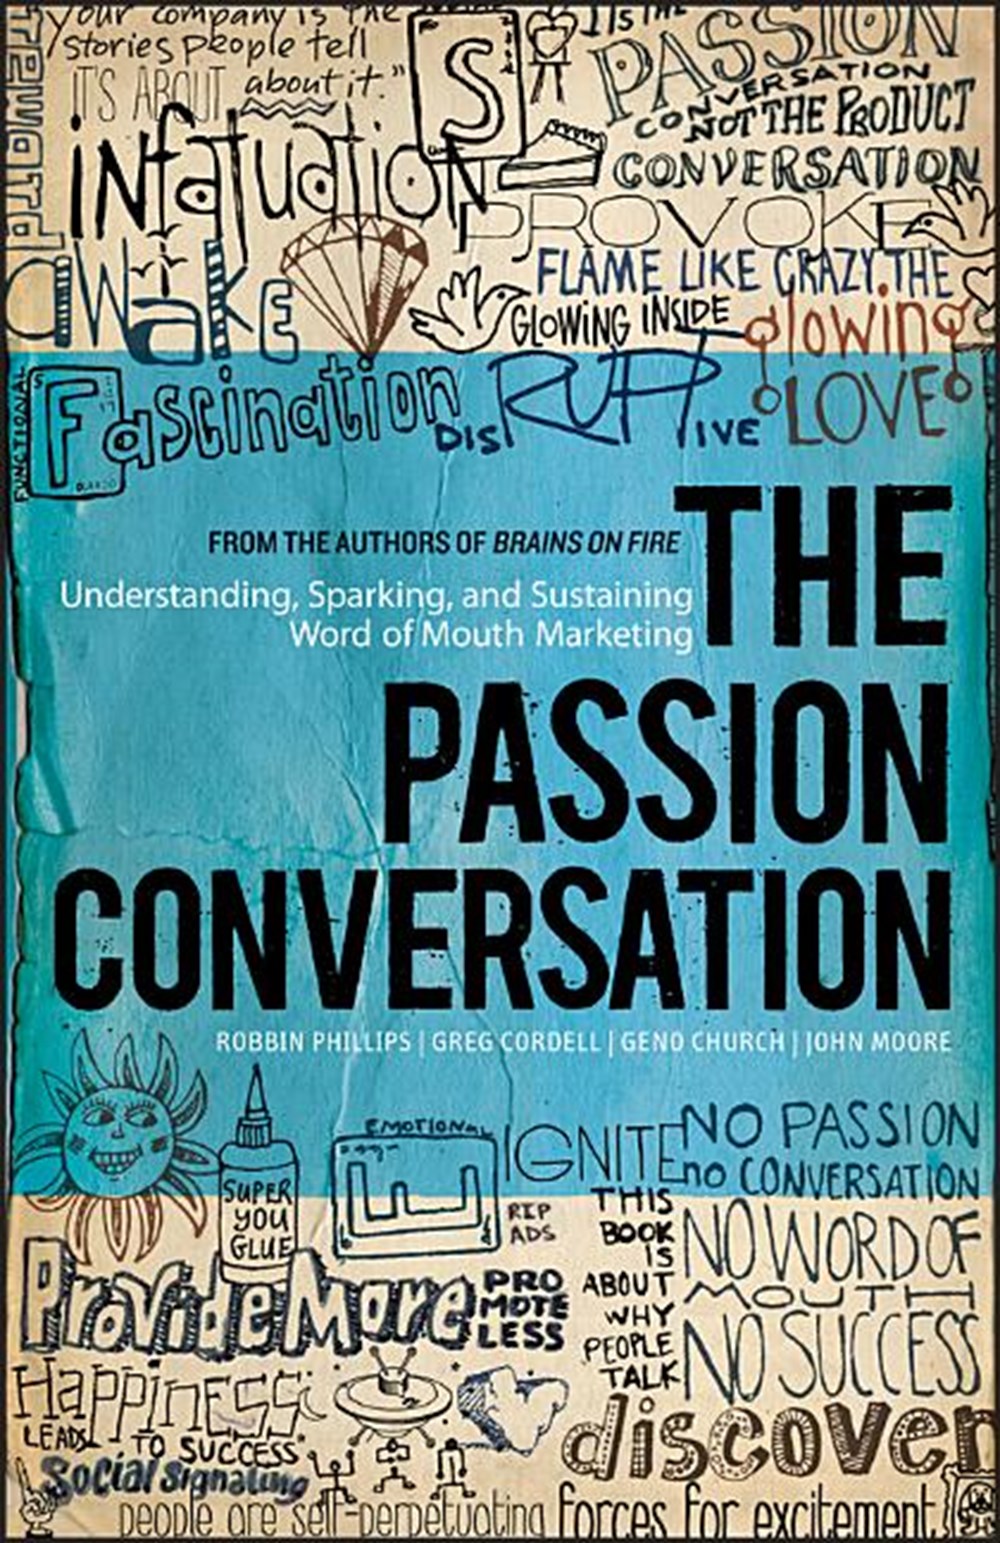 Passion Conversation Understanding, Sparking, and Sustaining Word of Mouth Marketing